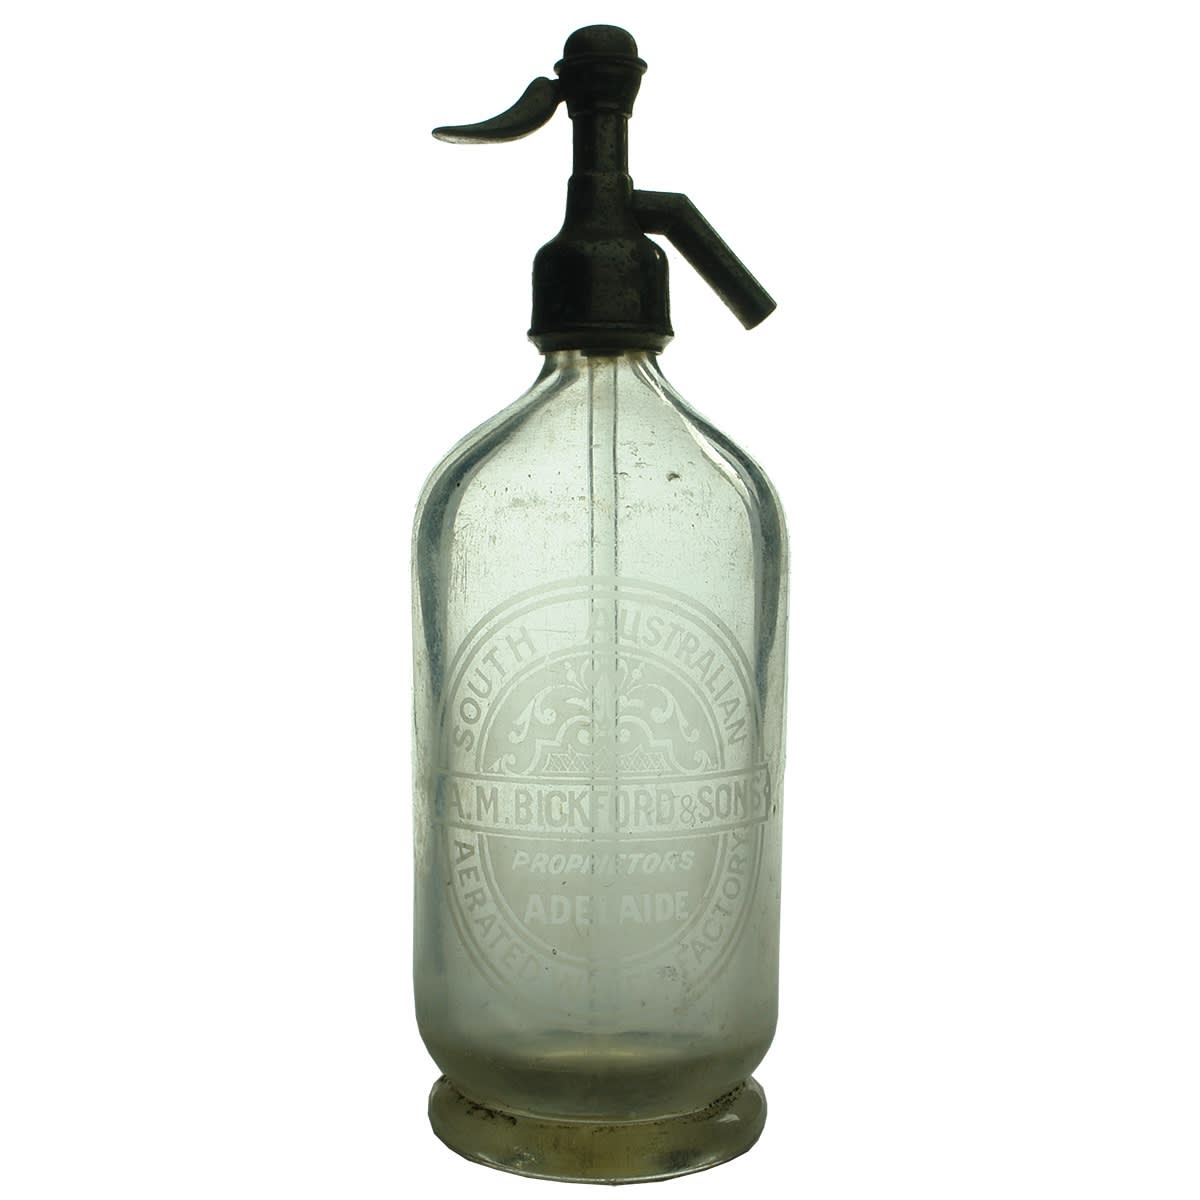 Soda Syphon. A. M. Bickford & Sons South Australian Aerated Water Factory, Adelaide. Round. 30 oz. (South Australia)